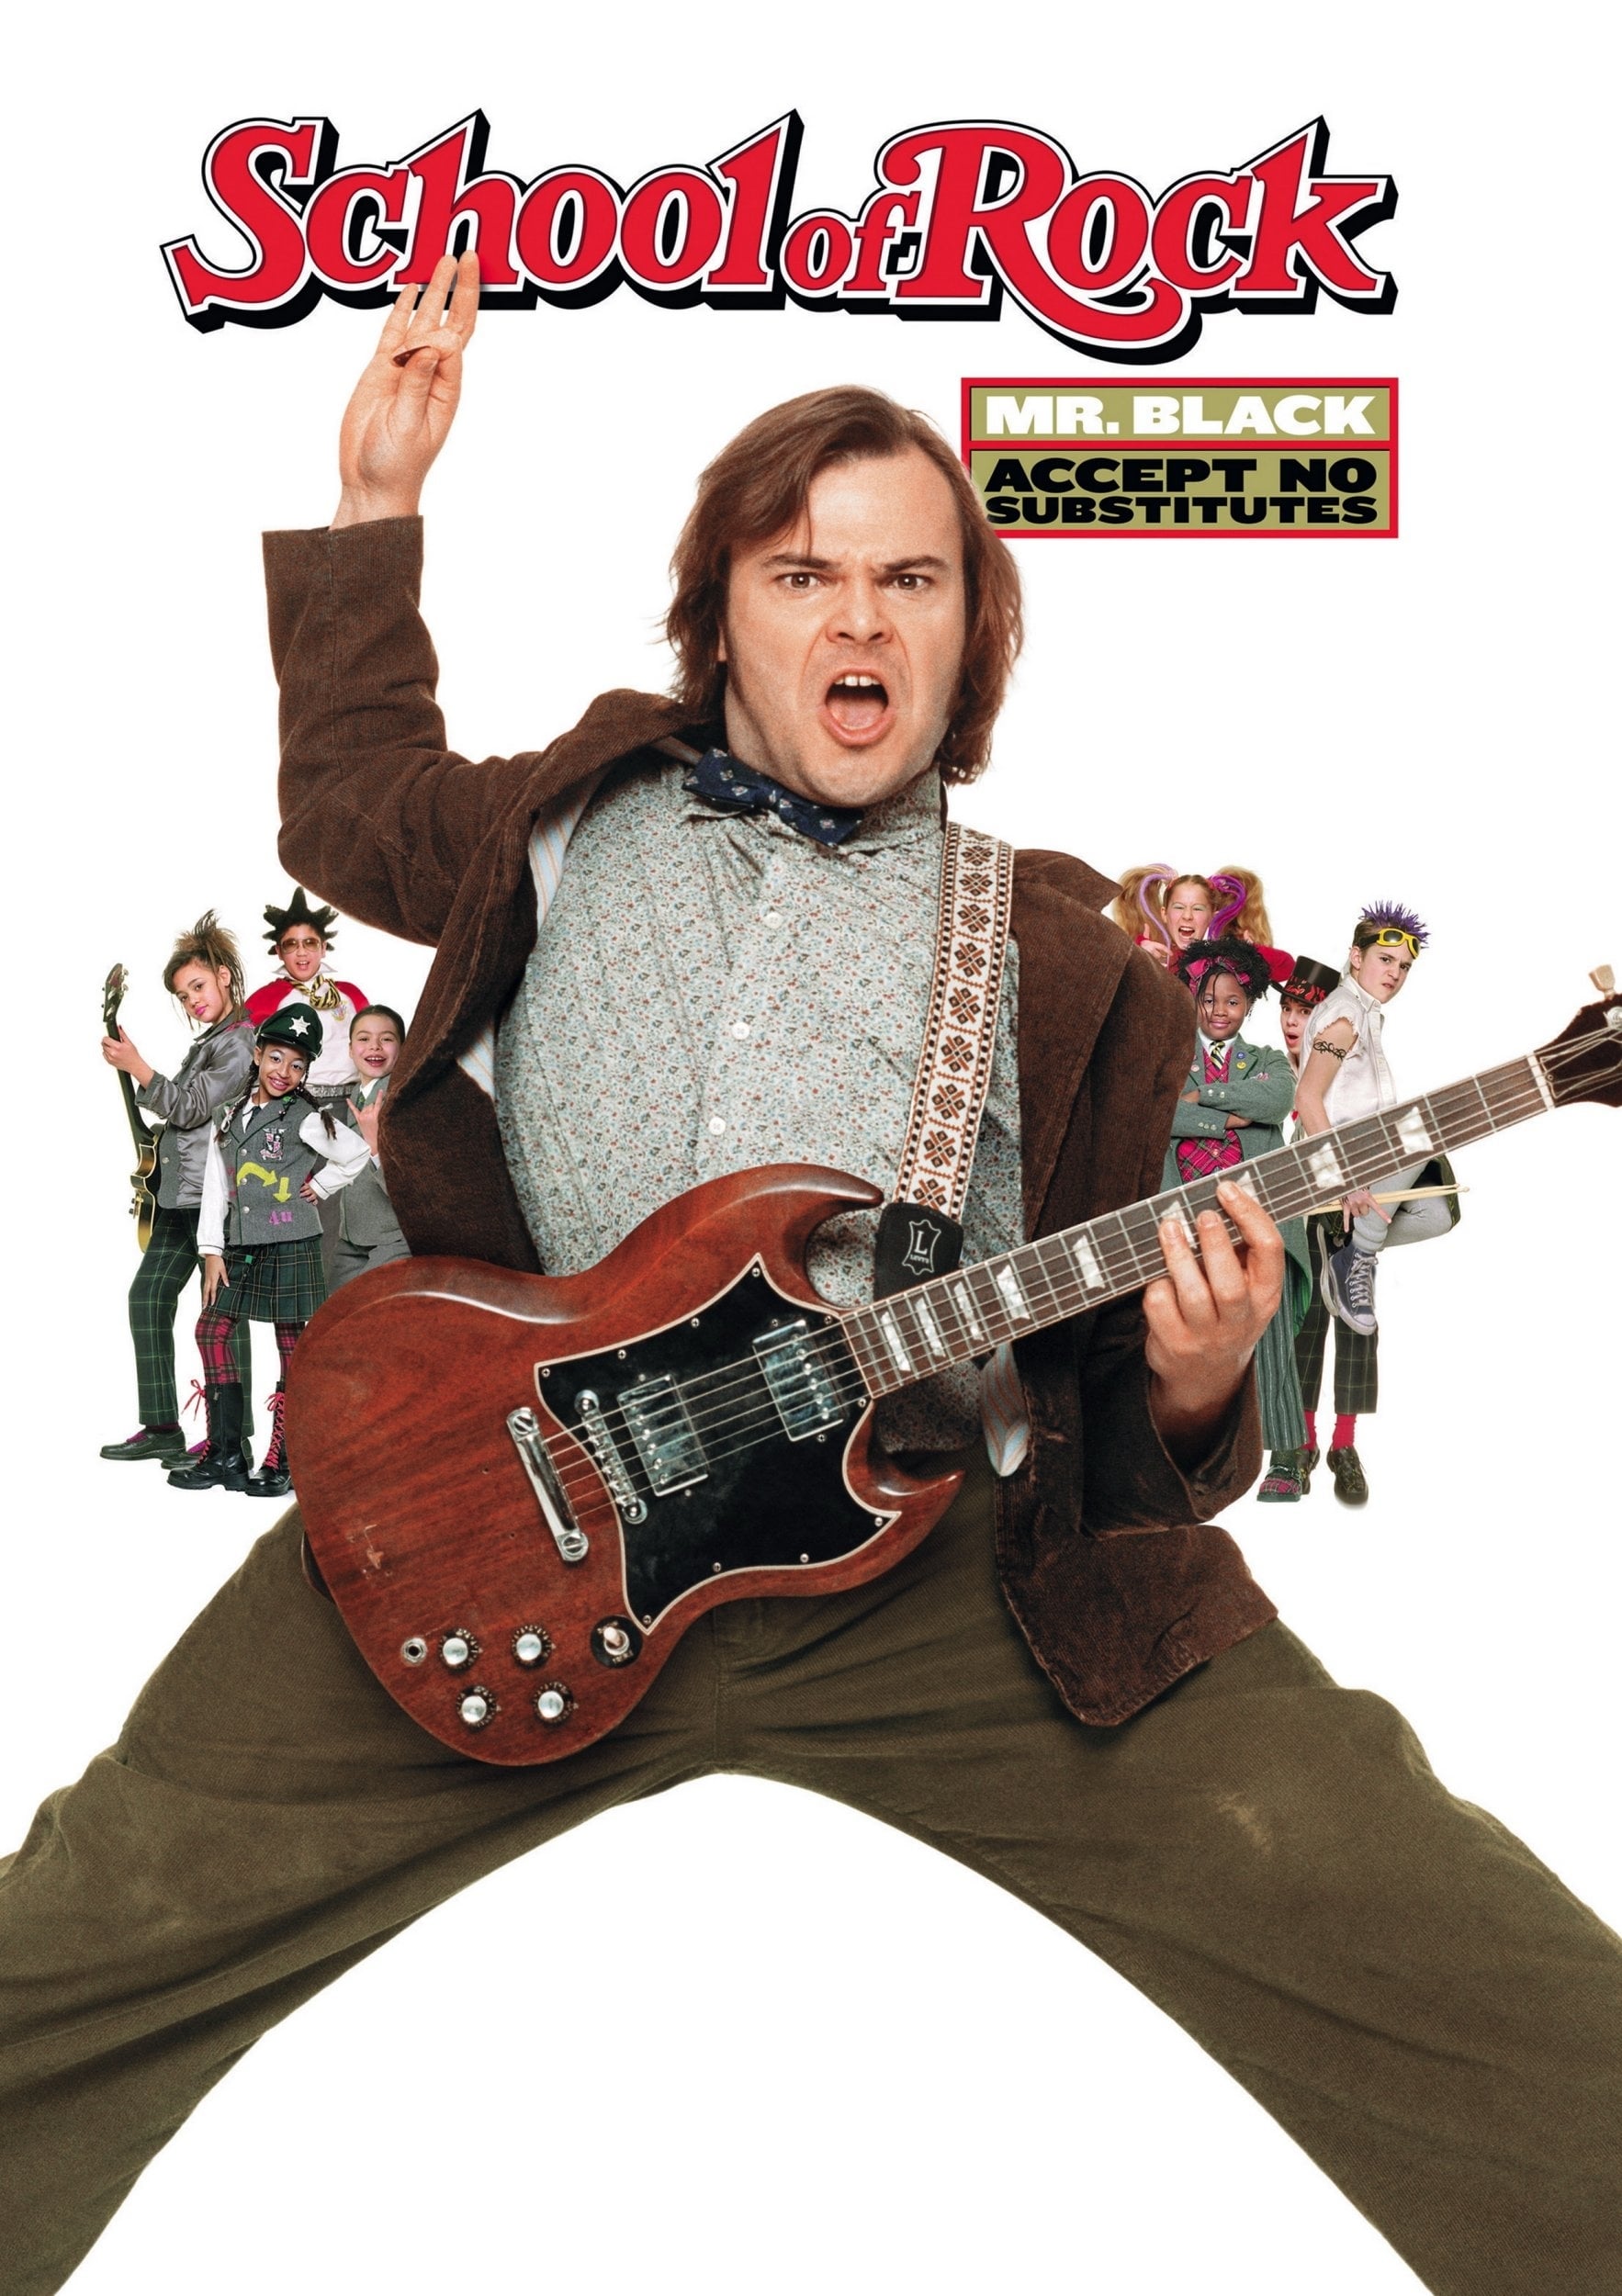 Movie poster for School Of Rock featuring Jack Black, guitar, and ic